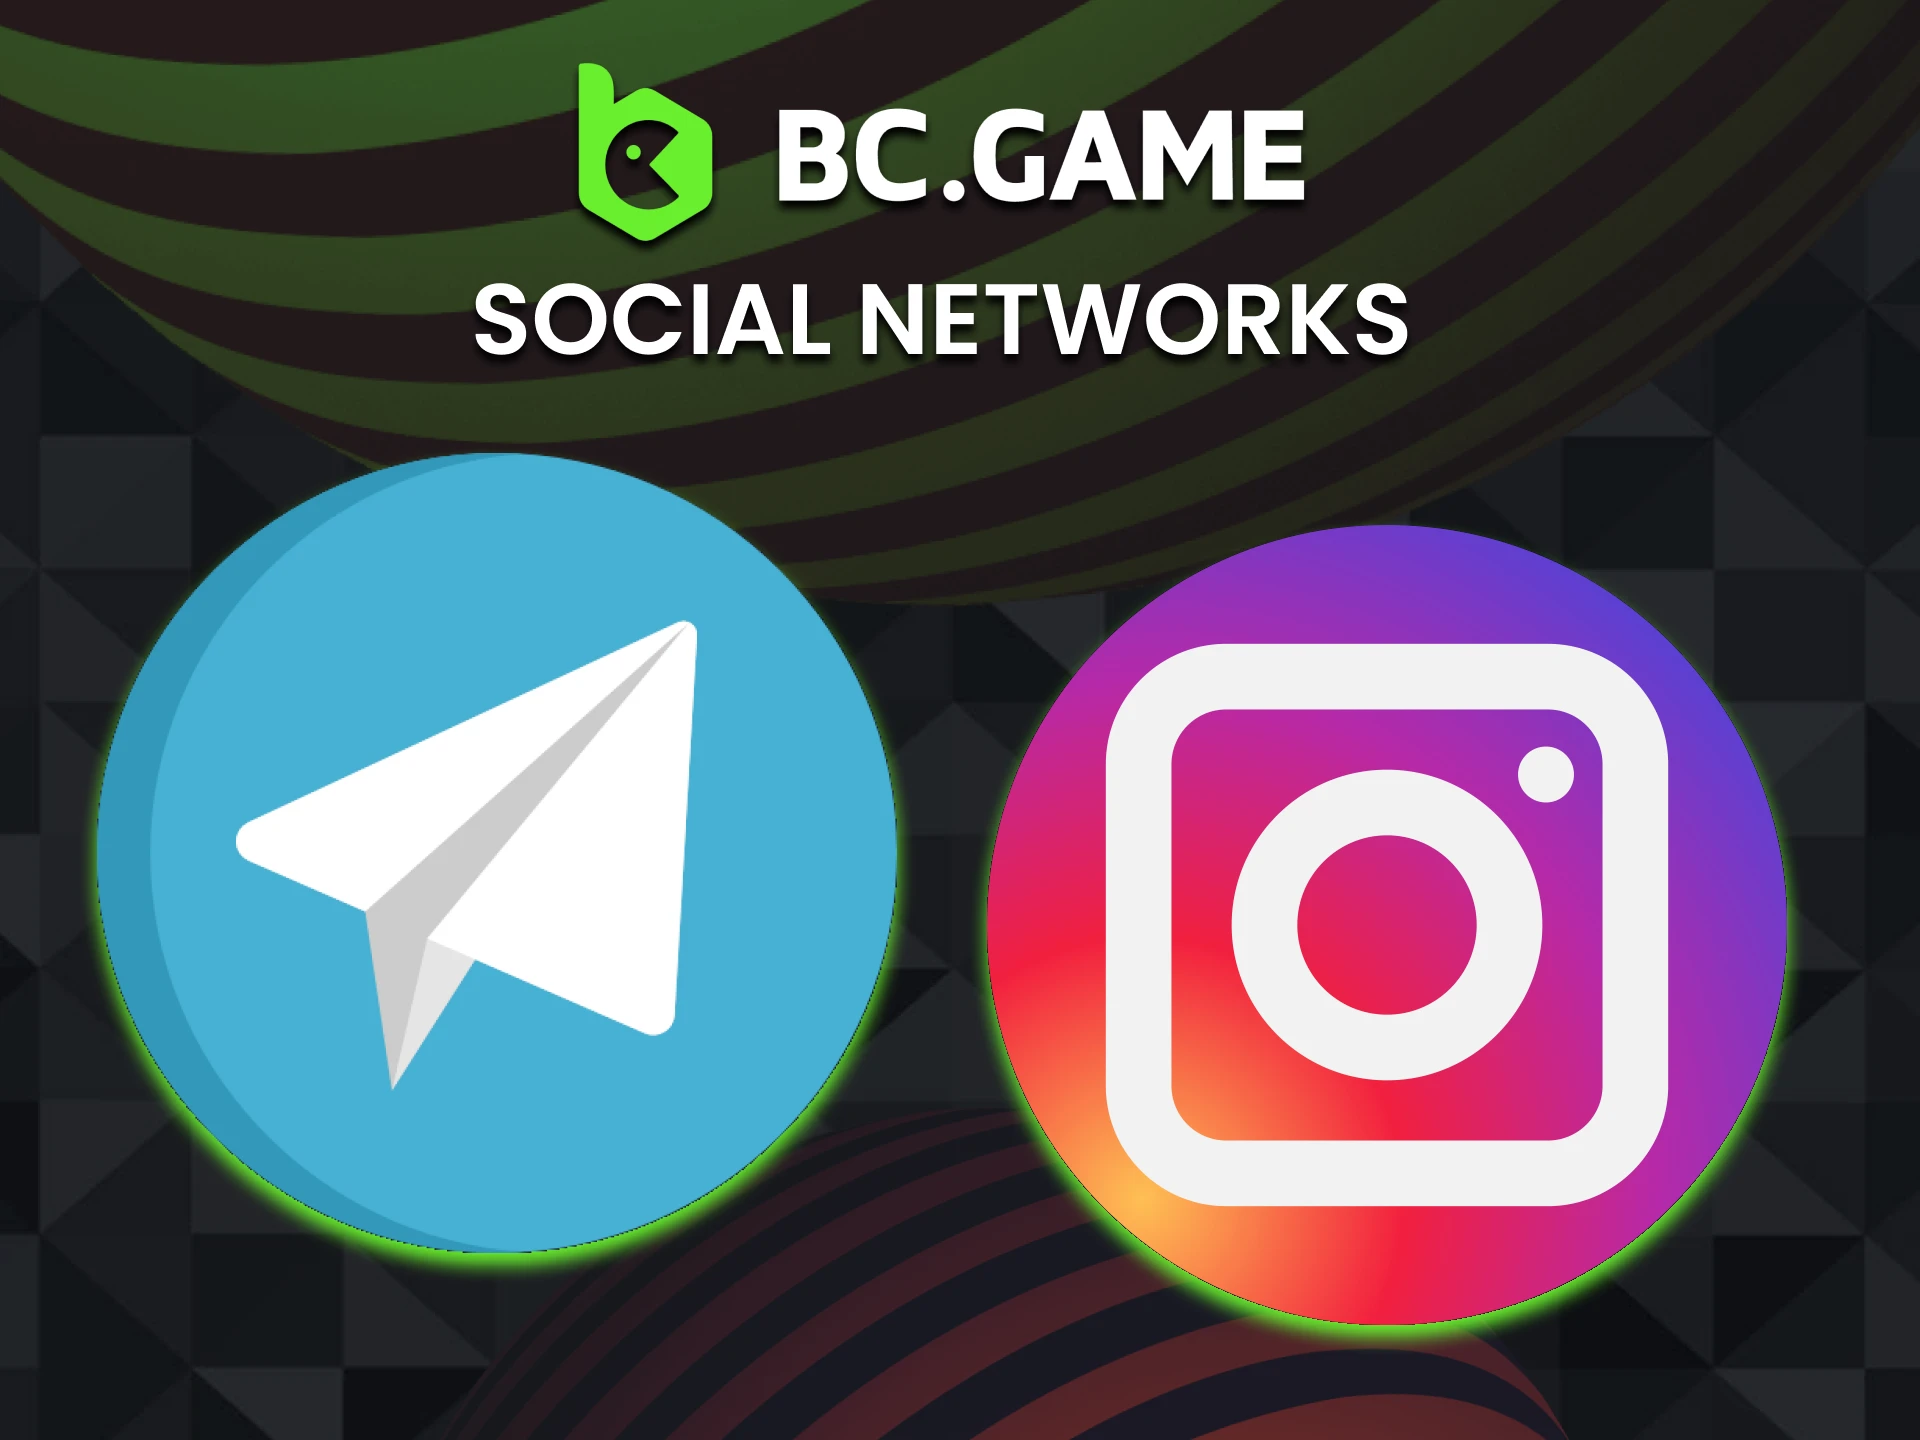 You can contact the BC Game support team via social networks.